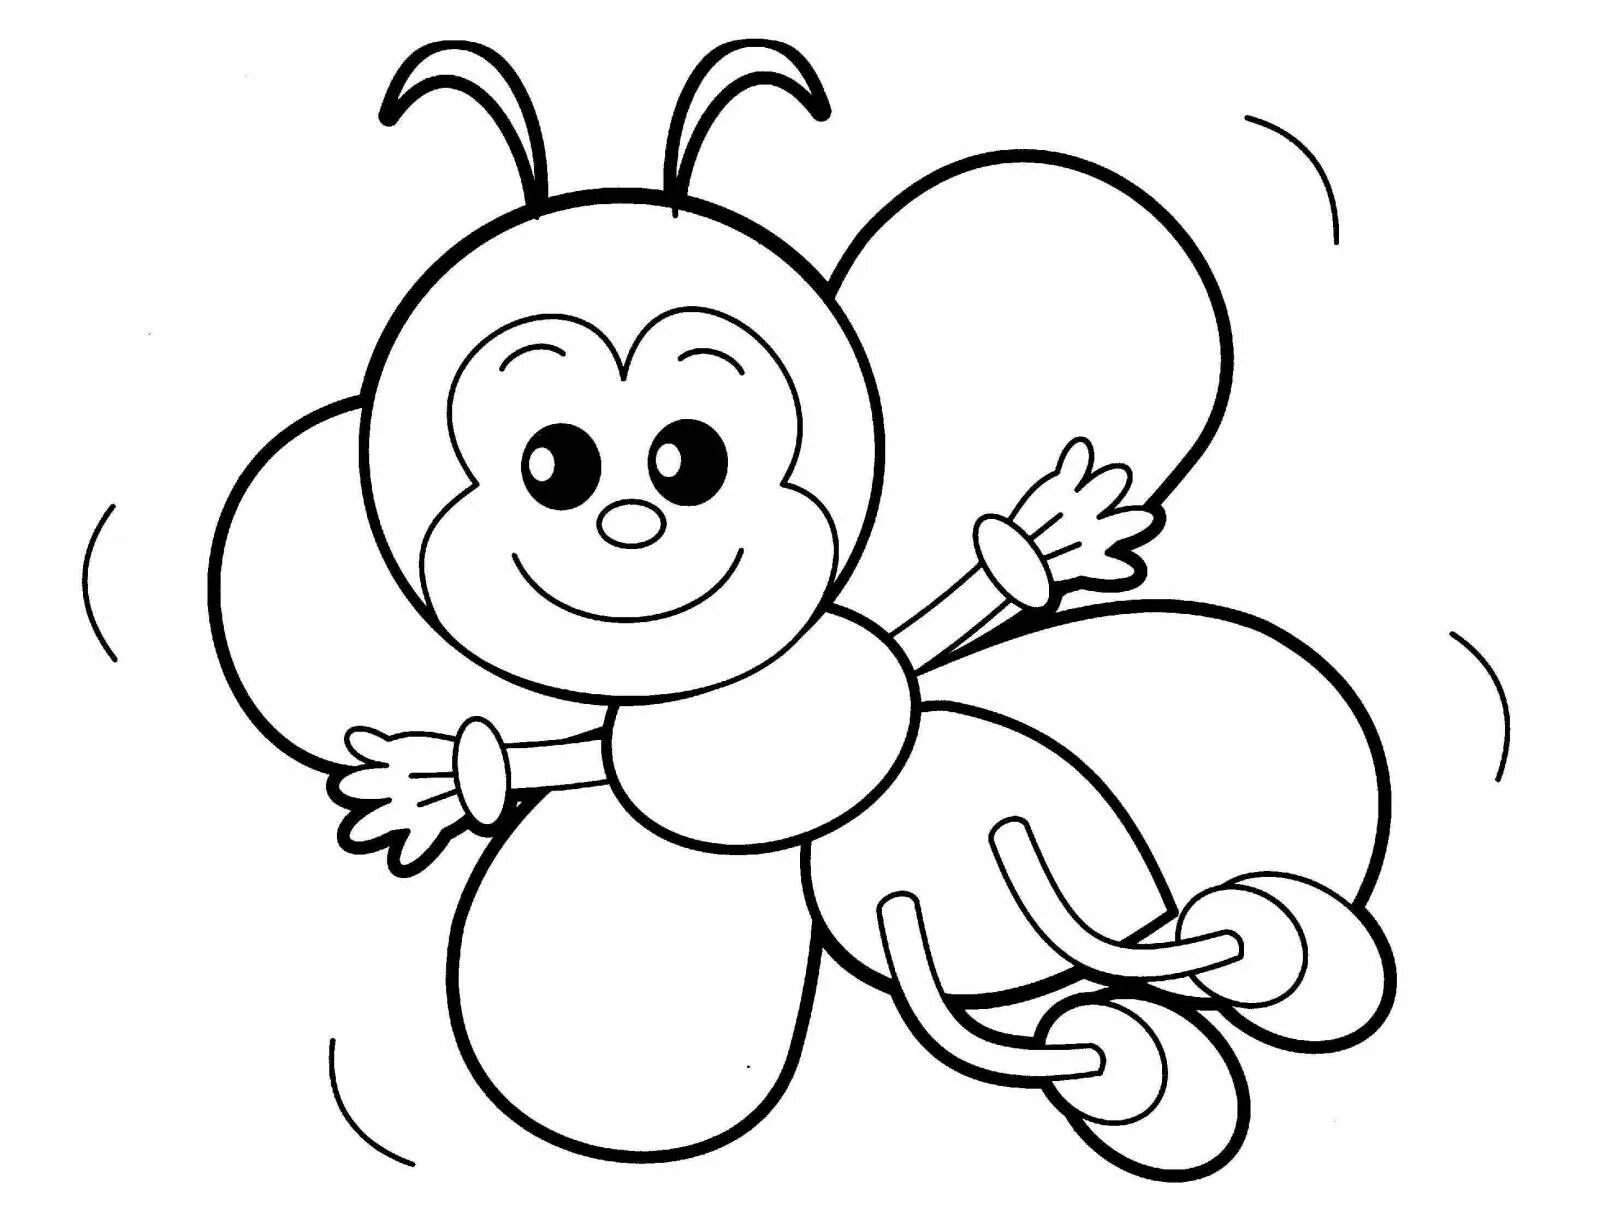 Coloring pages for kids for kids #29